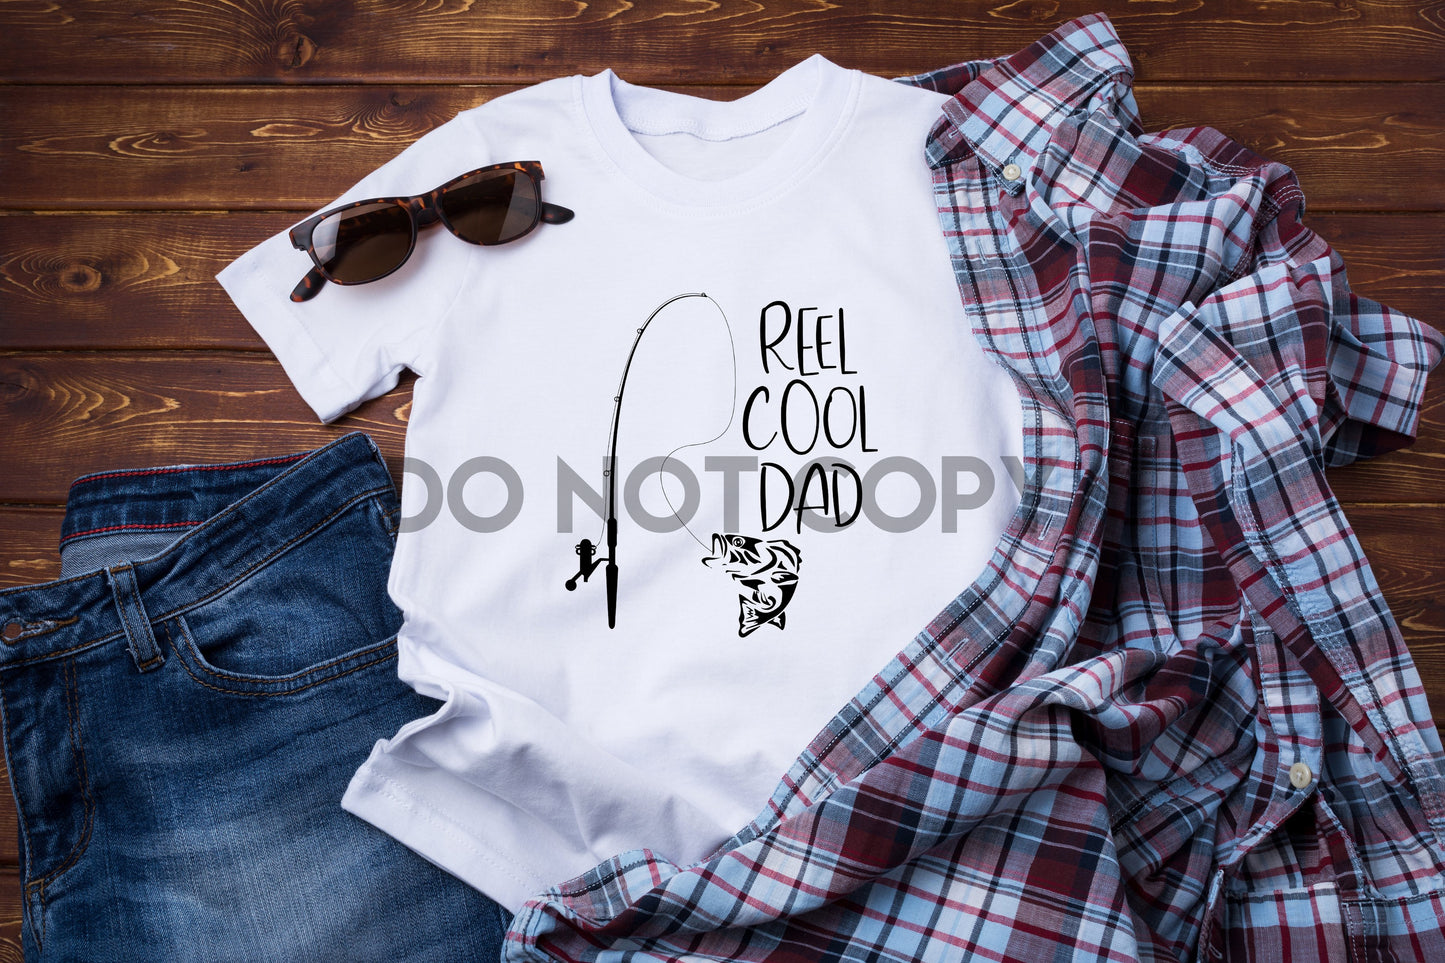 Reel Cool Dad BLACK or WHITE Dream Print or Sublimation Print